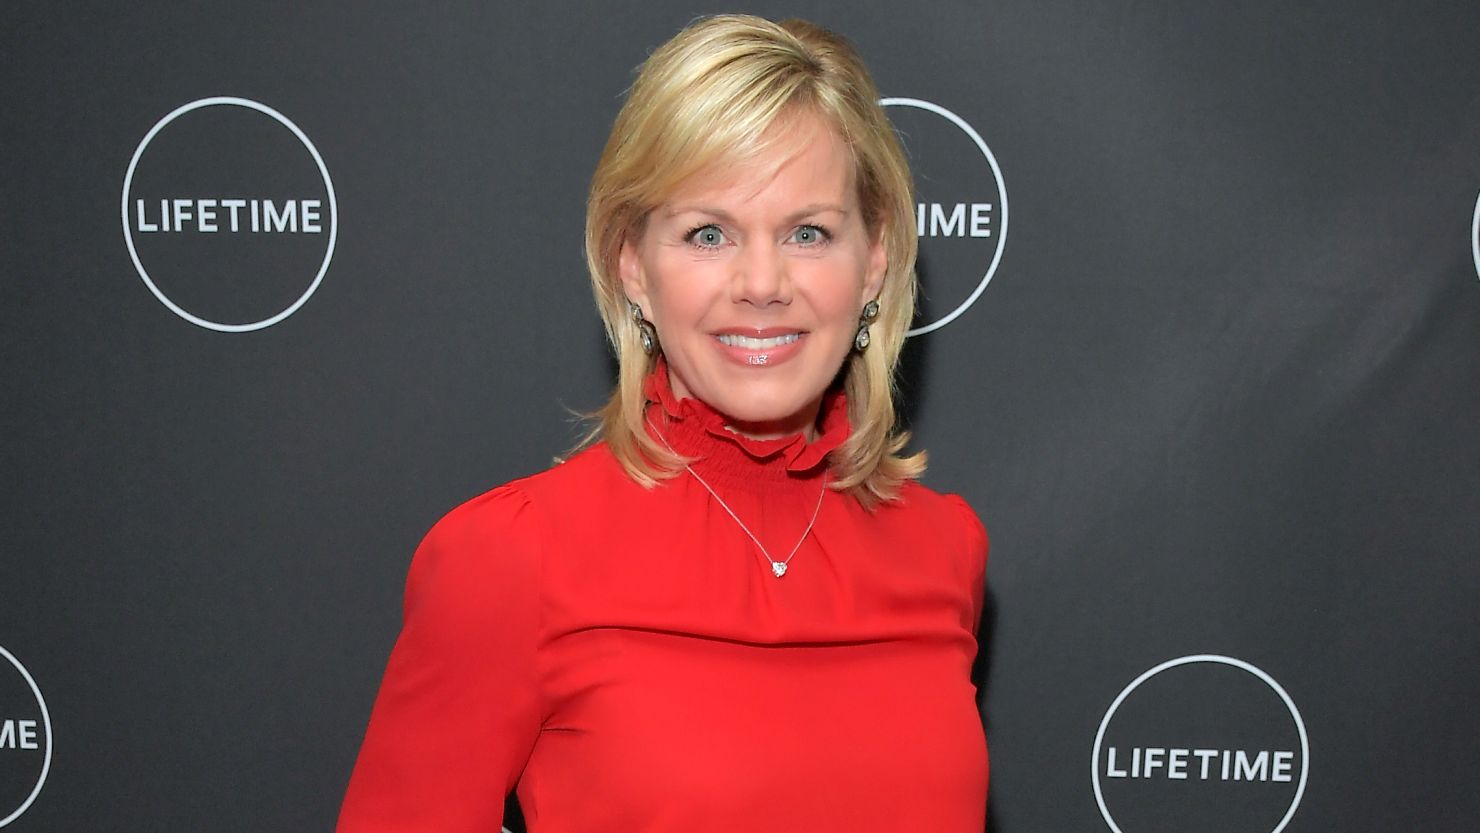 Gretchen Carlson attends Lifetime / NeueHouse Luminaries series 'Surviving R. Kelly' documentary screening and conversation at Neuehouse NY on December 04, 2018 in New York City. (Photo by Chance Yeh/Getty Images for A+E)